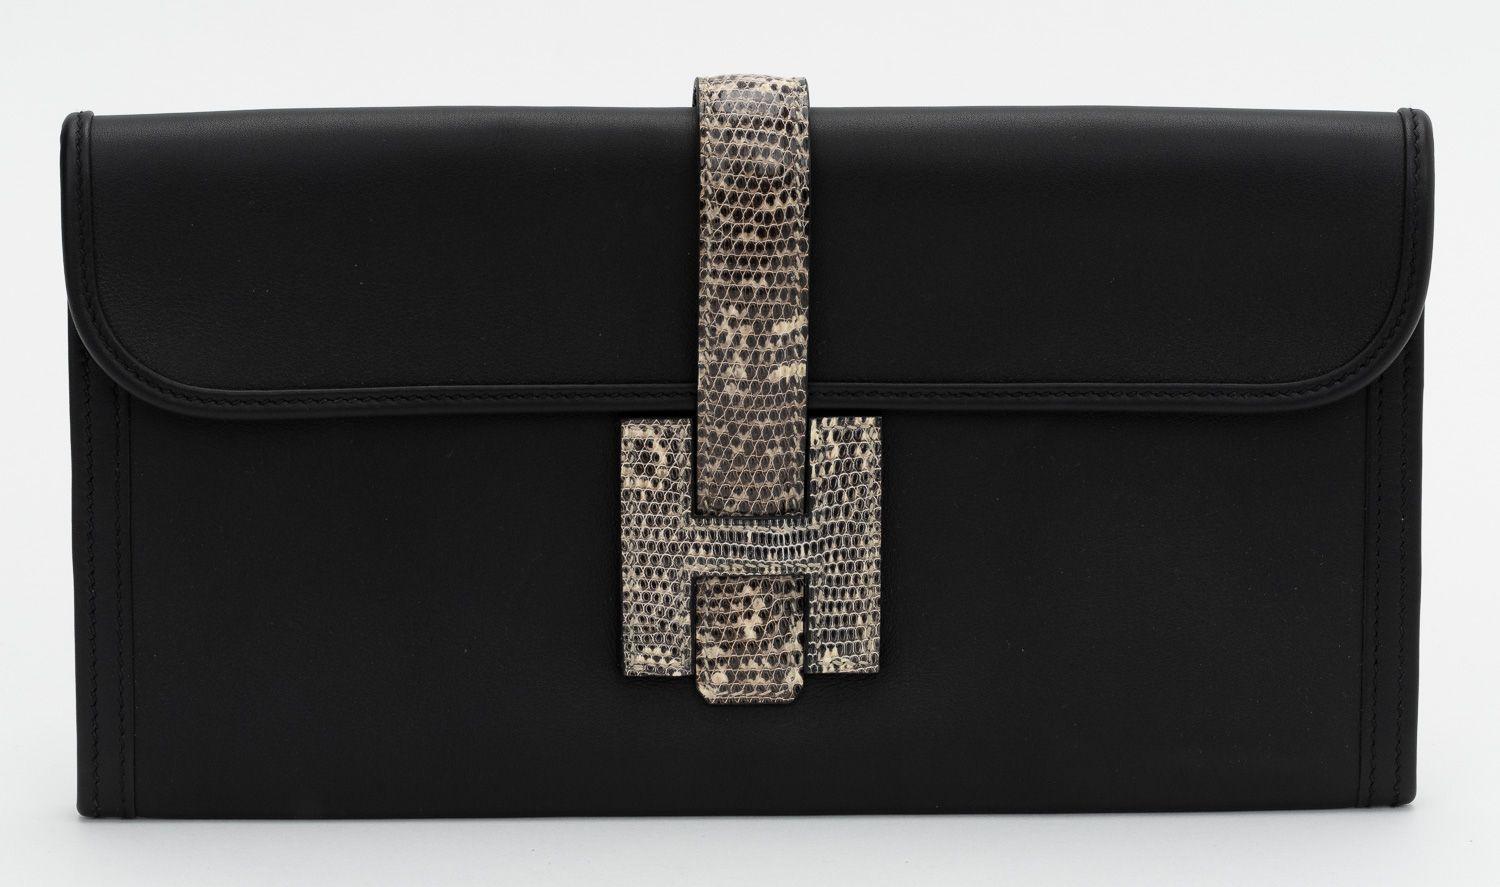 Hermès black leather 2020 Noir Swift Ombre Varanus Salvator Lizard Jige Elan Touch 29 clutch bag. The date stamp shows a D. The bag comes with the booklet and original box. No cites, does not ship internationally.